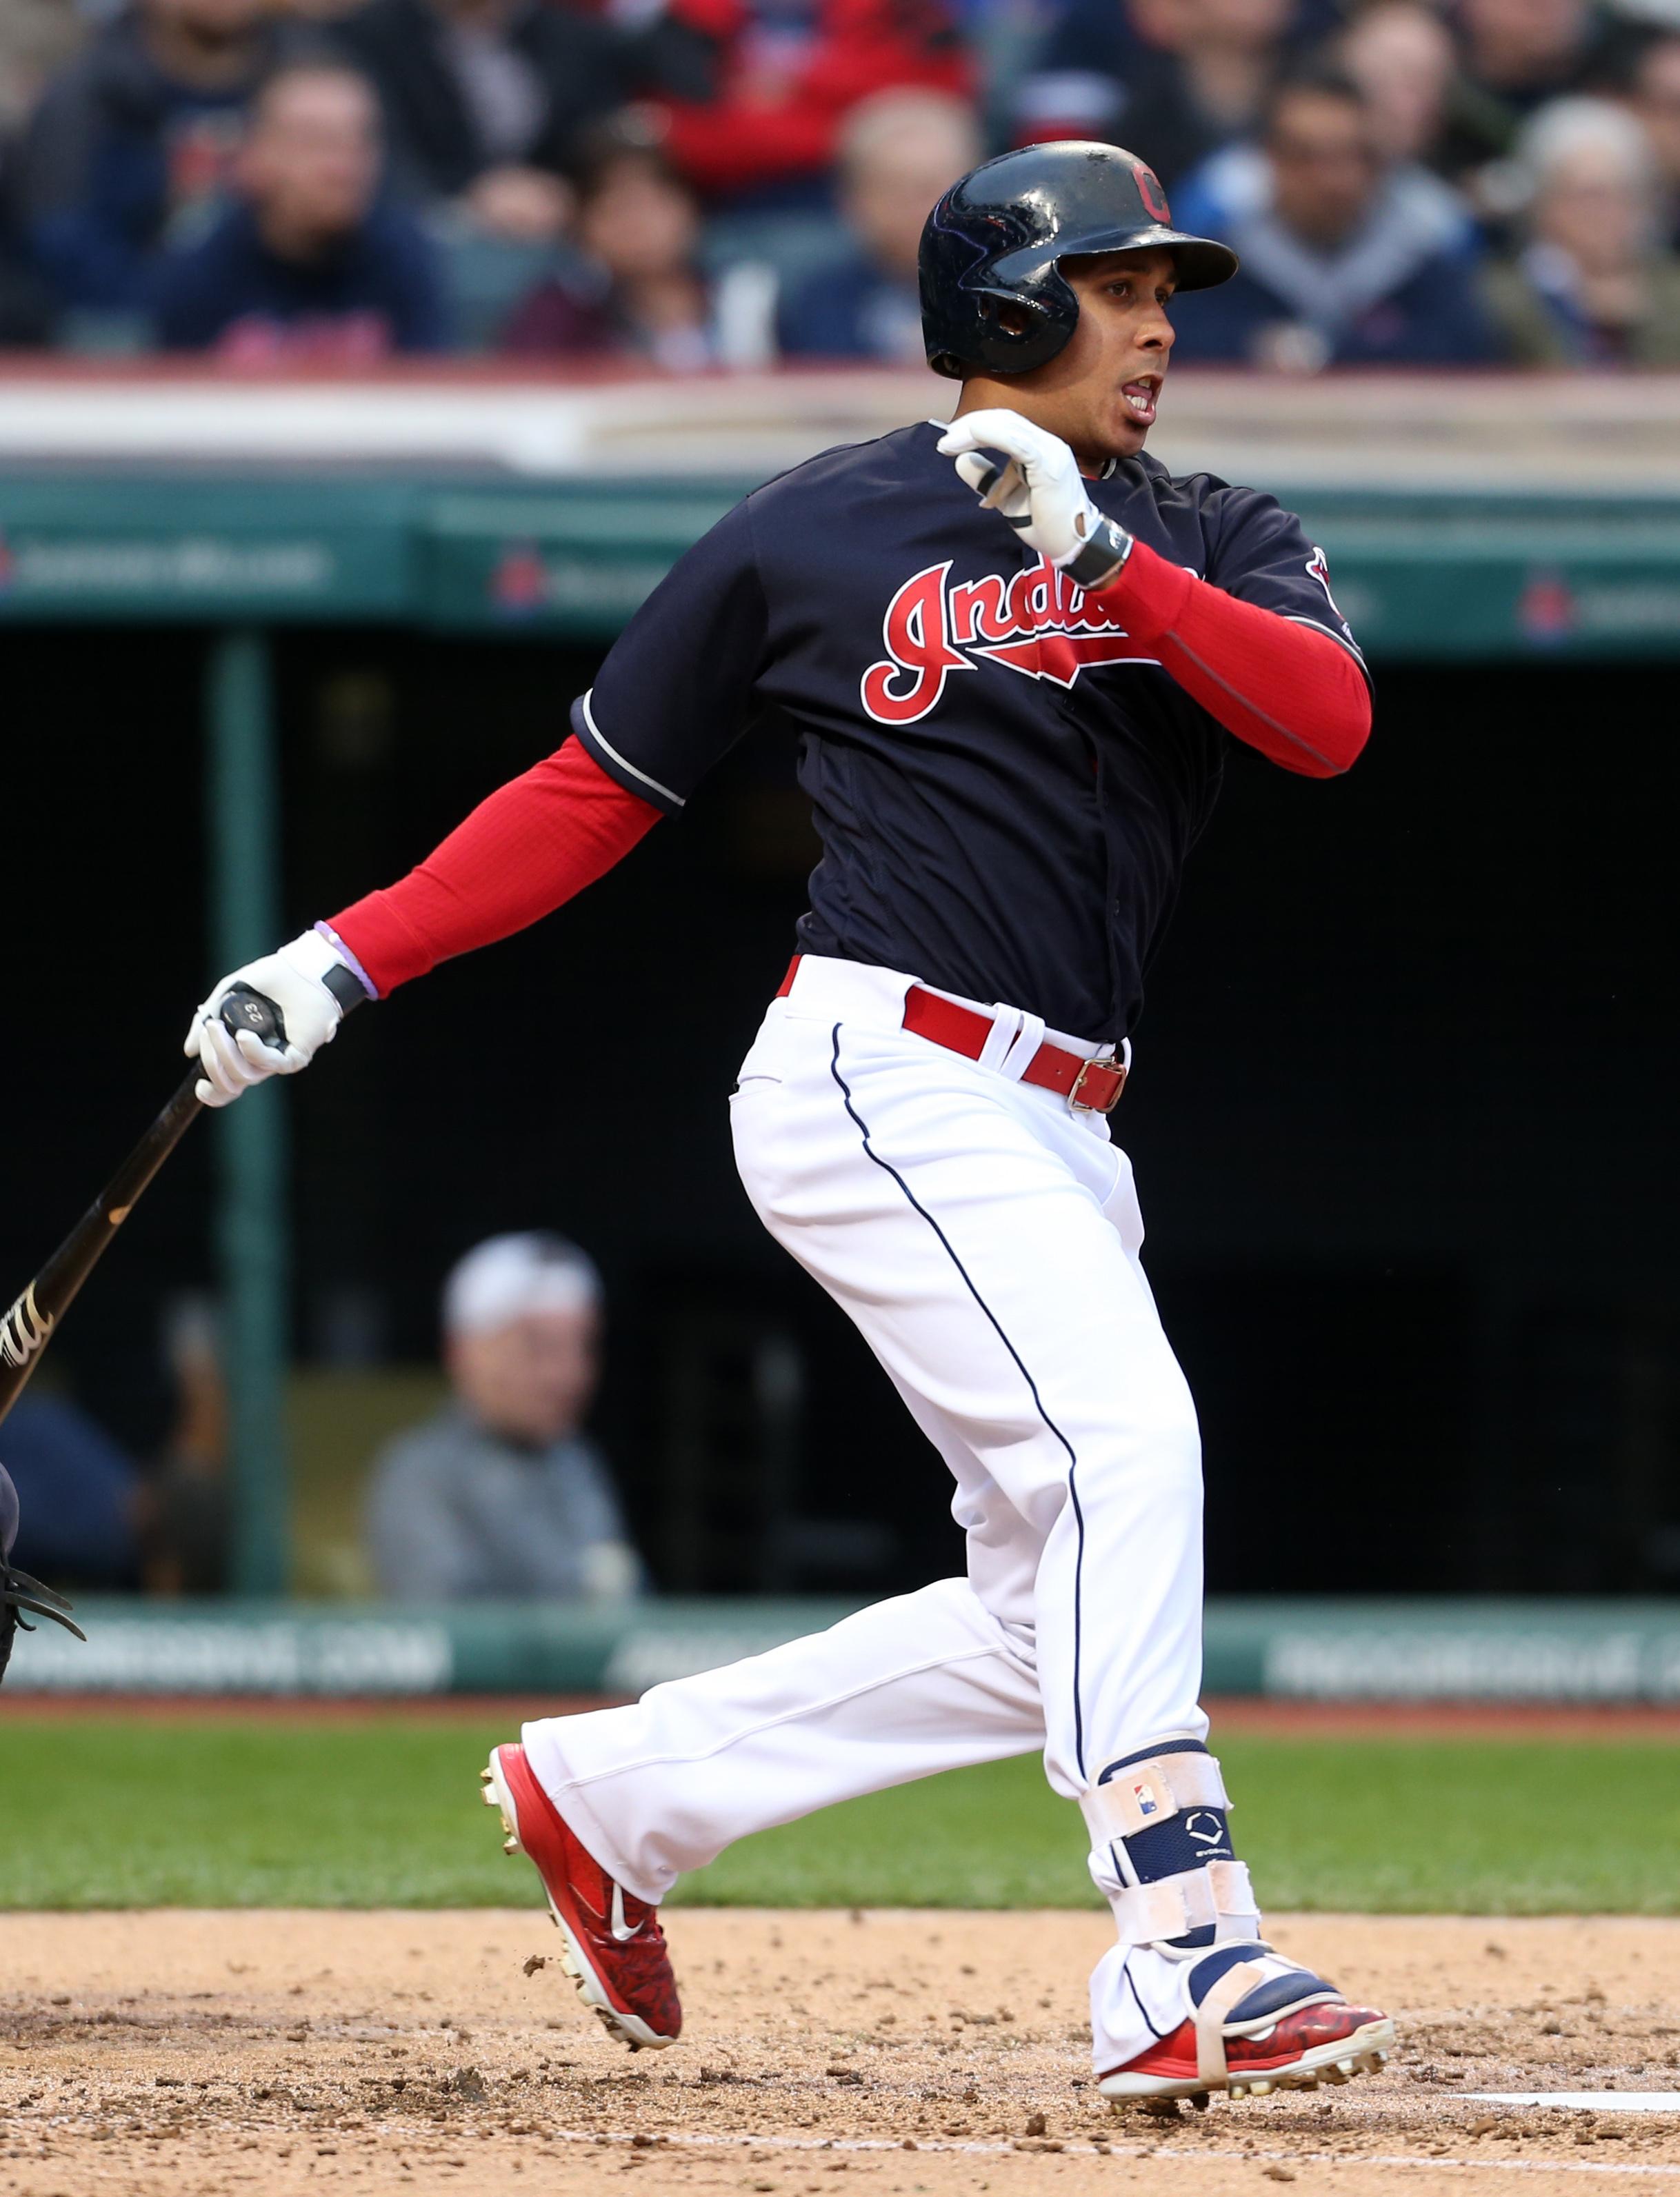 WATCH: Cleveland Indians thank Michael Brantley in Twitter video